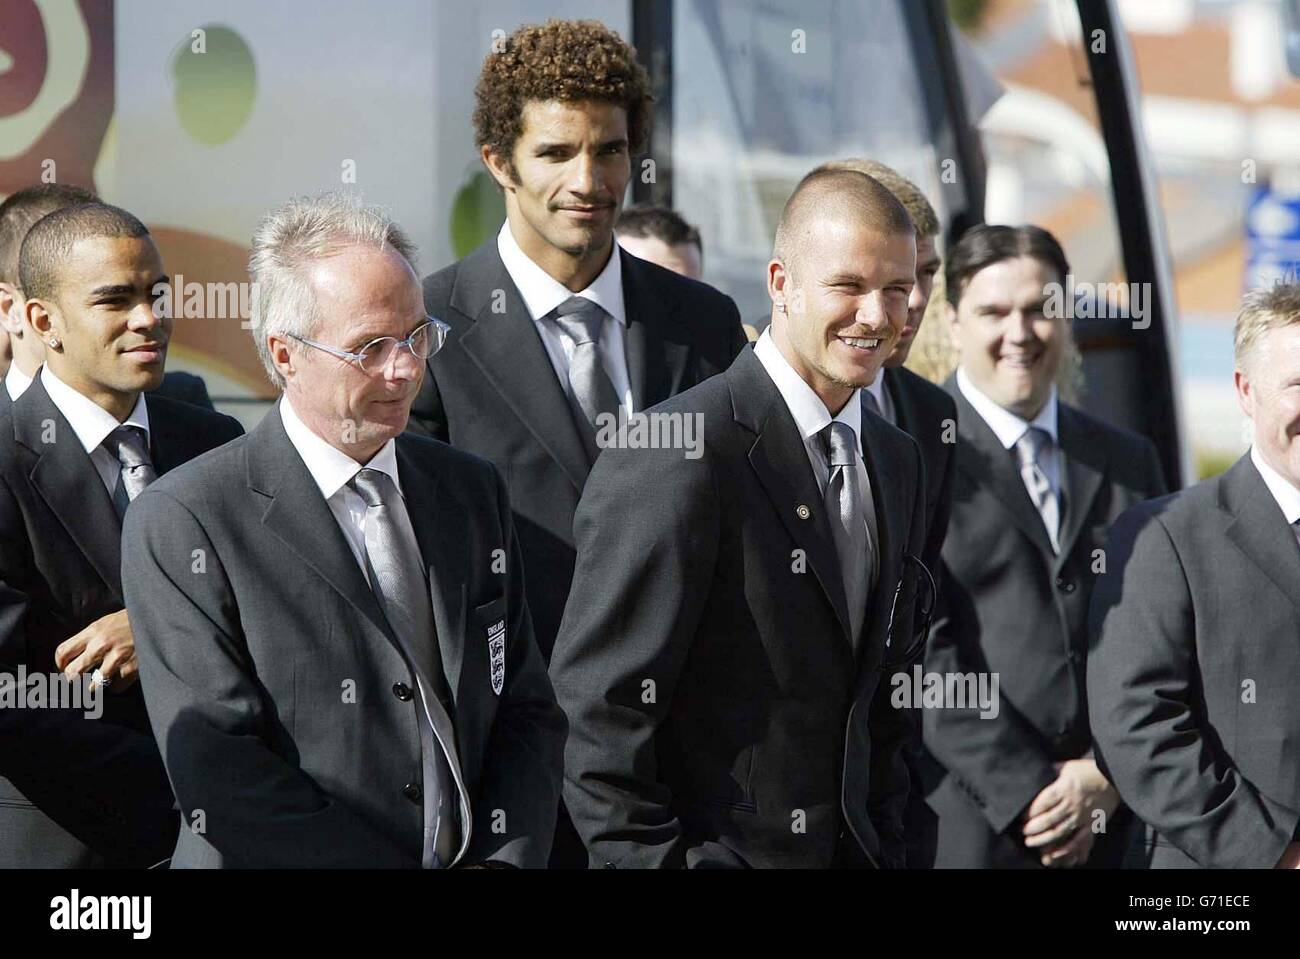 The England football squad led by captain David Beckham (fourth left) and manager Sven Goran Eriksson (second left) arrive at the Solplay Hotel in Portugal for the Euro 2004 tournament. England will play their opening first round match against France on Sunday. Stock Photo